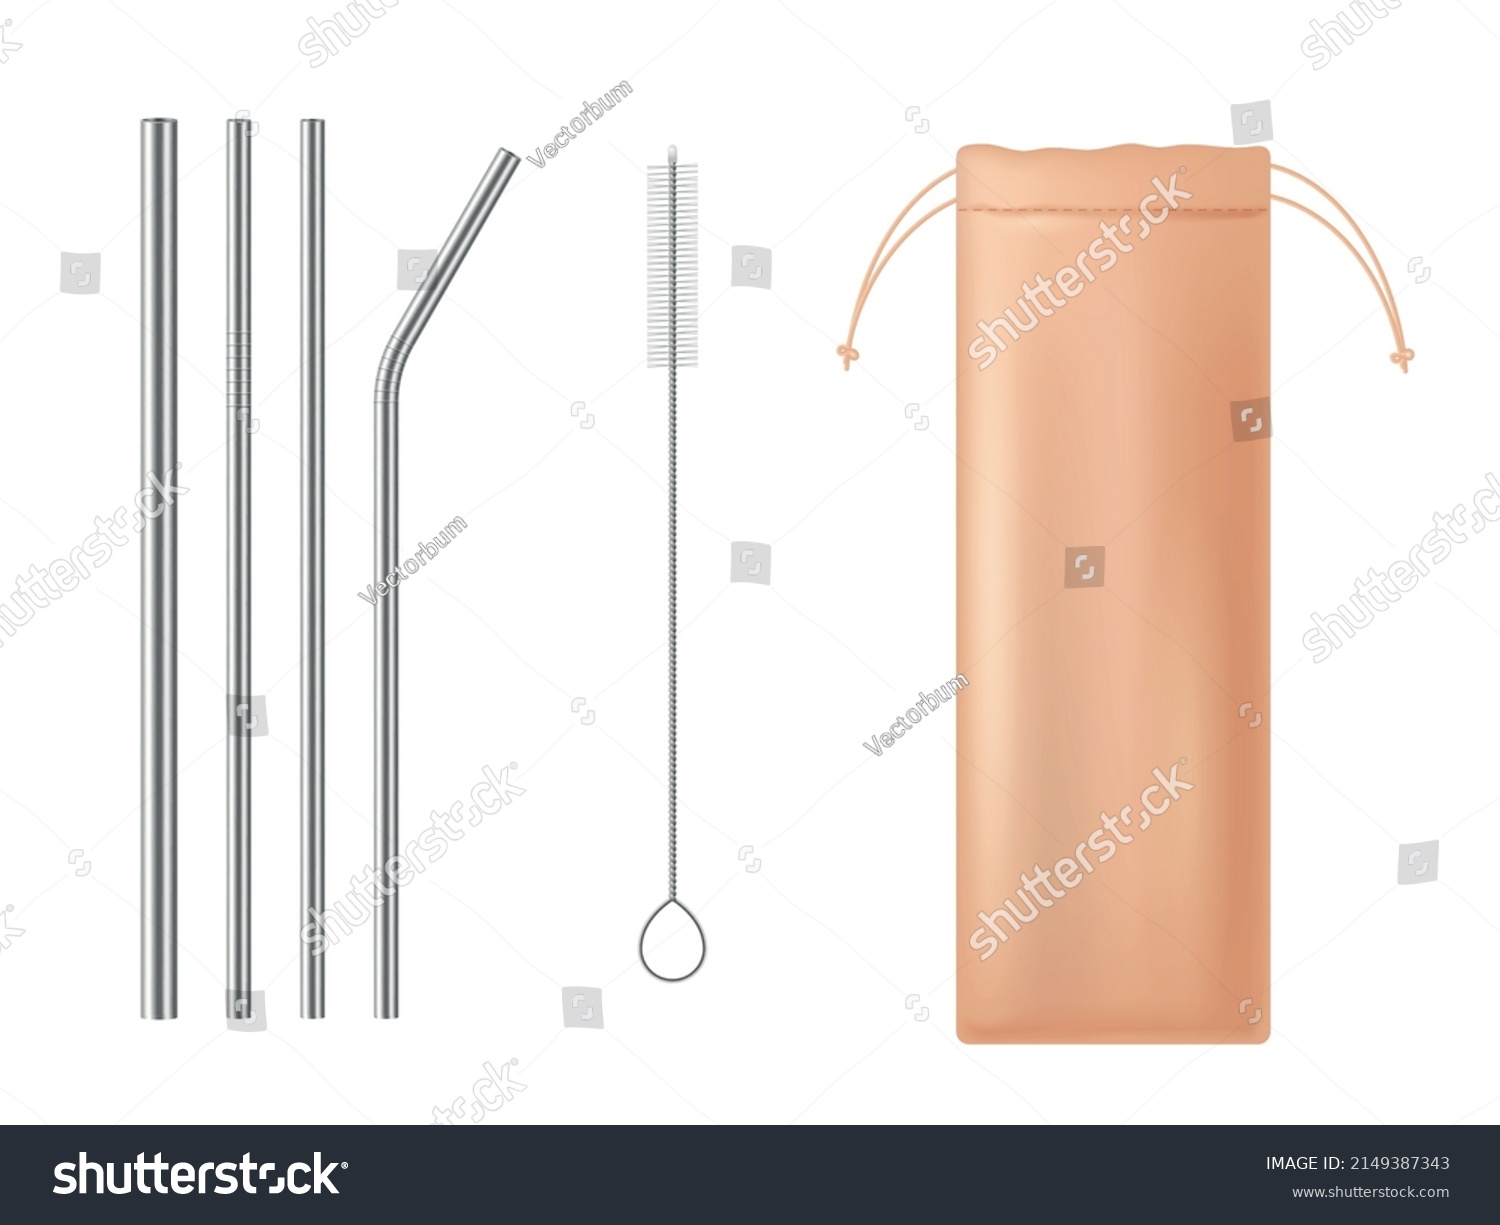 SVG of Straws for drink. Realistic beverage pipes. Silver cocktail sticks. Steel straight and curved tools. Cleaning ramrod brush and storage bag. Zero waste. Vector ecological svg